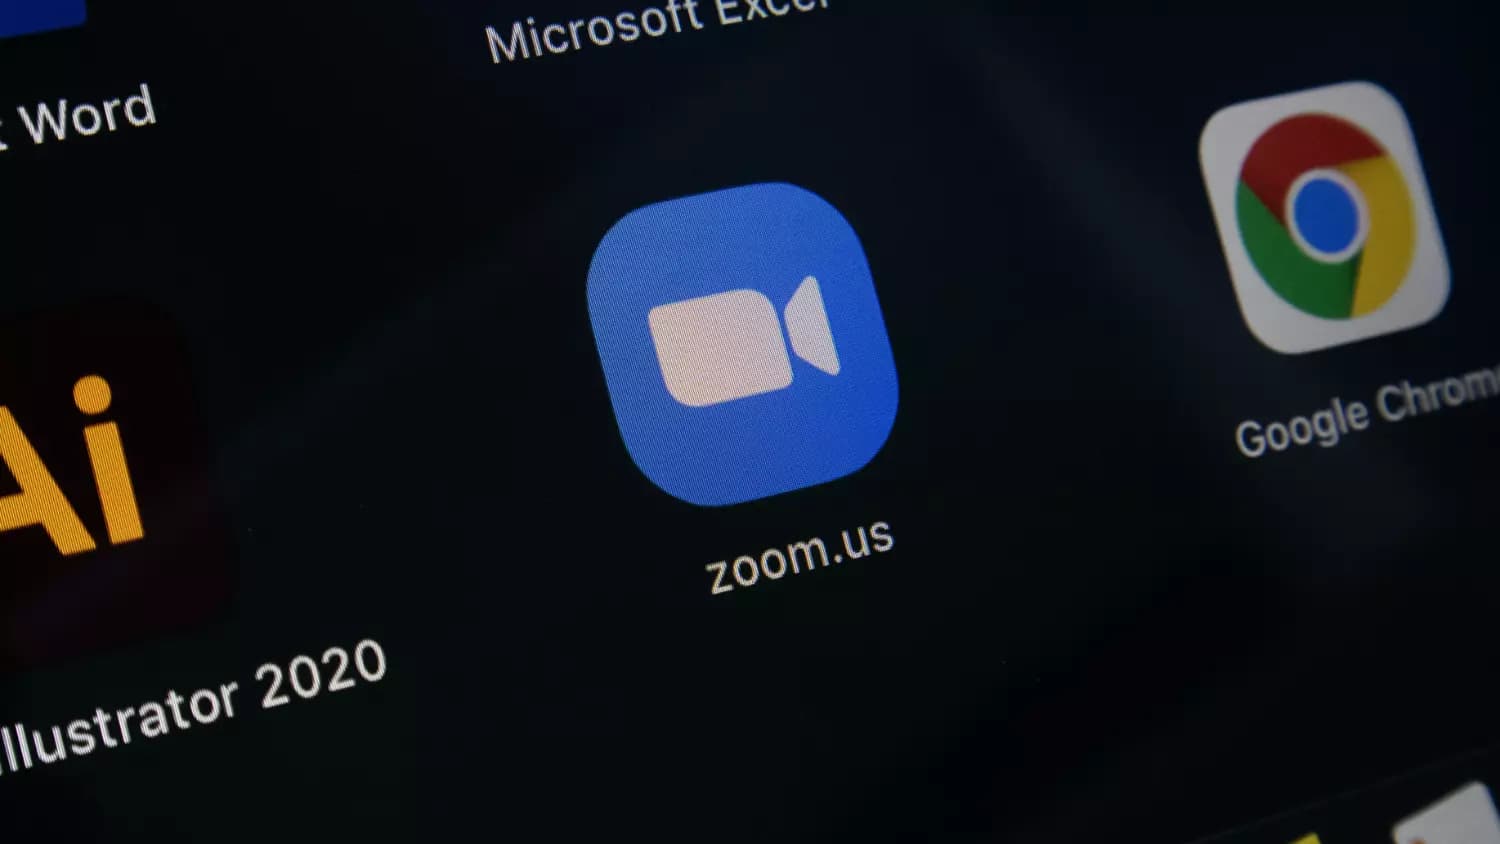 What Happened With The Zoom Credentials Hack?